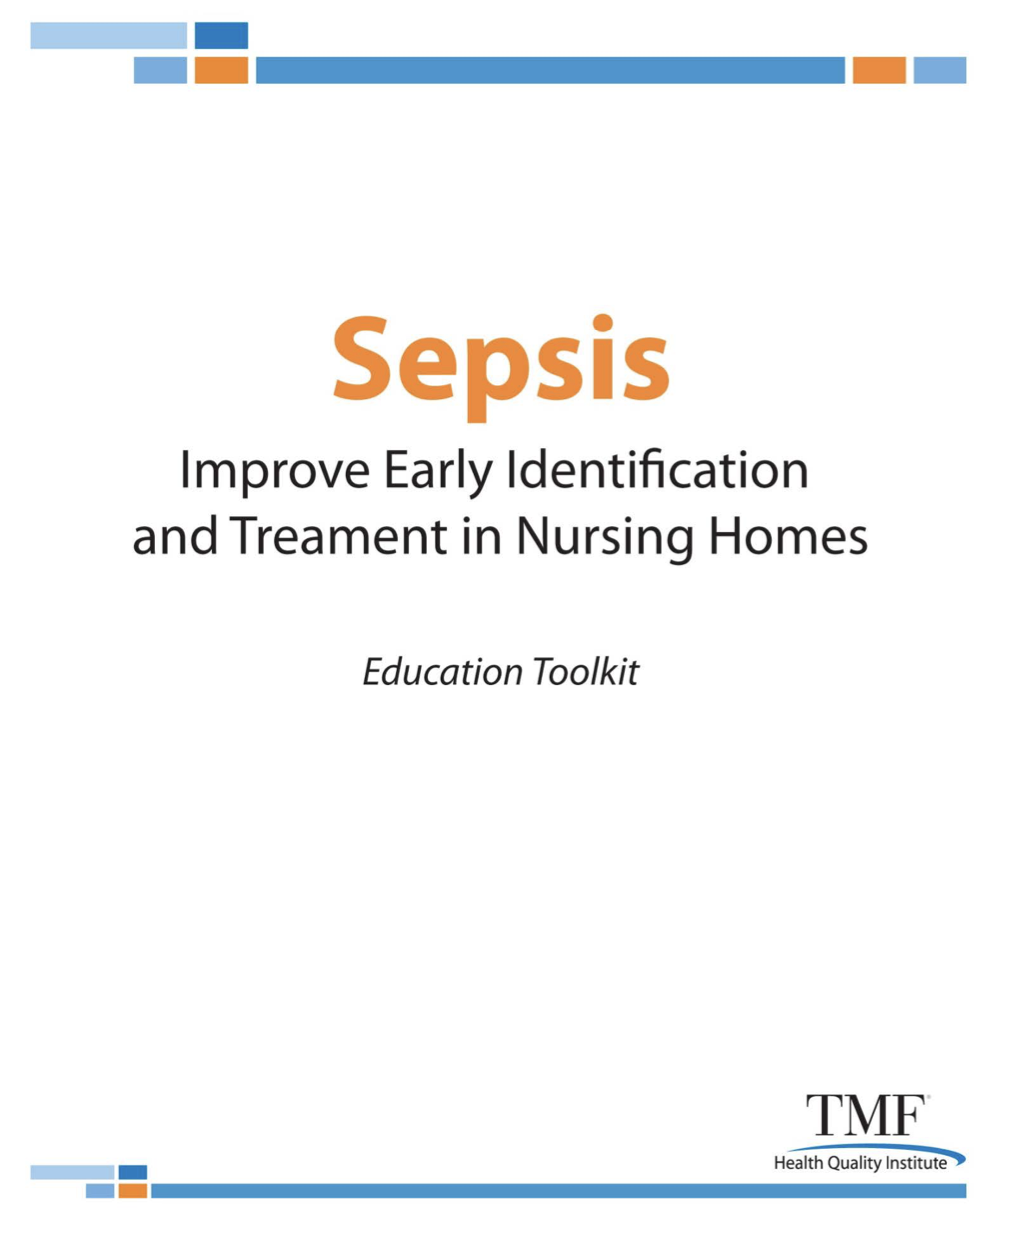 Sepsis - Improve Early Identification and Treatment in Nursing Homes Education Toolkit